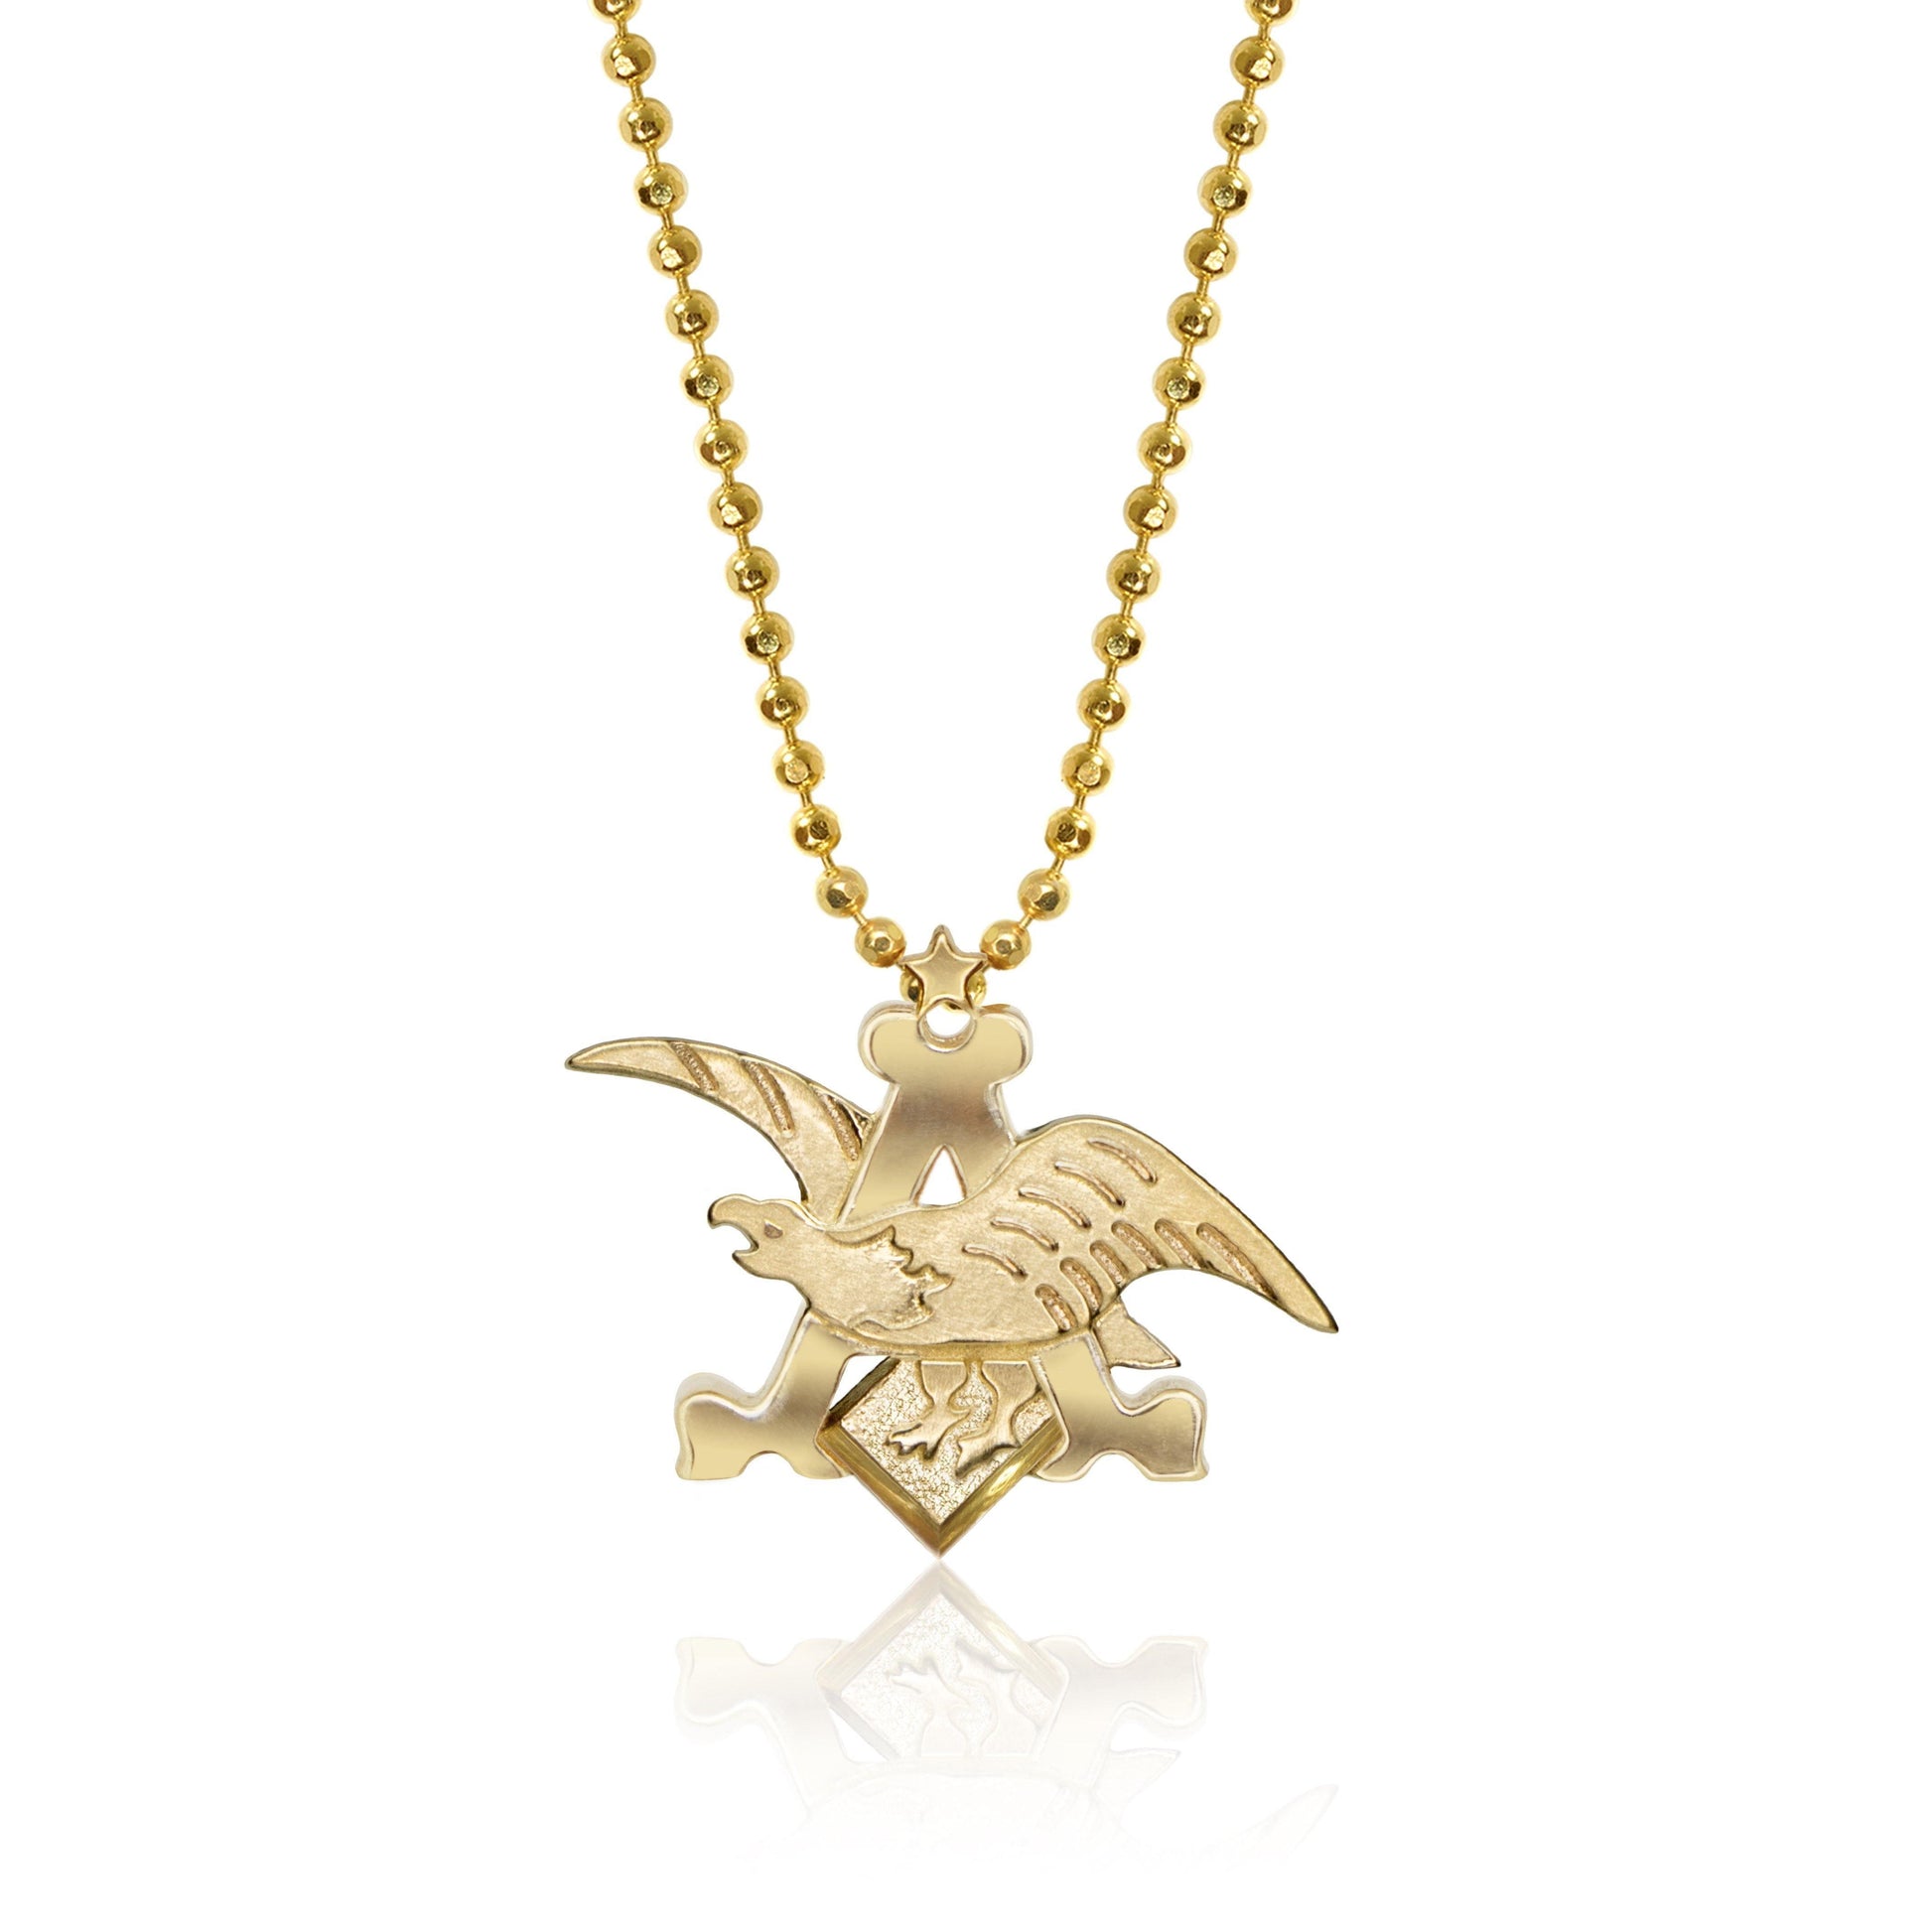 From Alex Woo a 14 carat gold Anheuser-Bsuch & Eagle necklace, 16 inches long